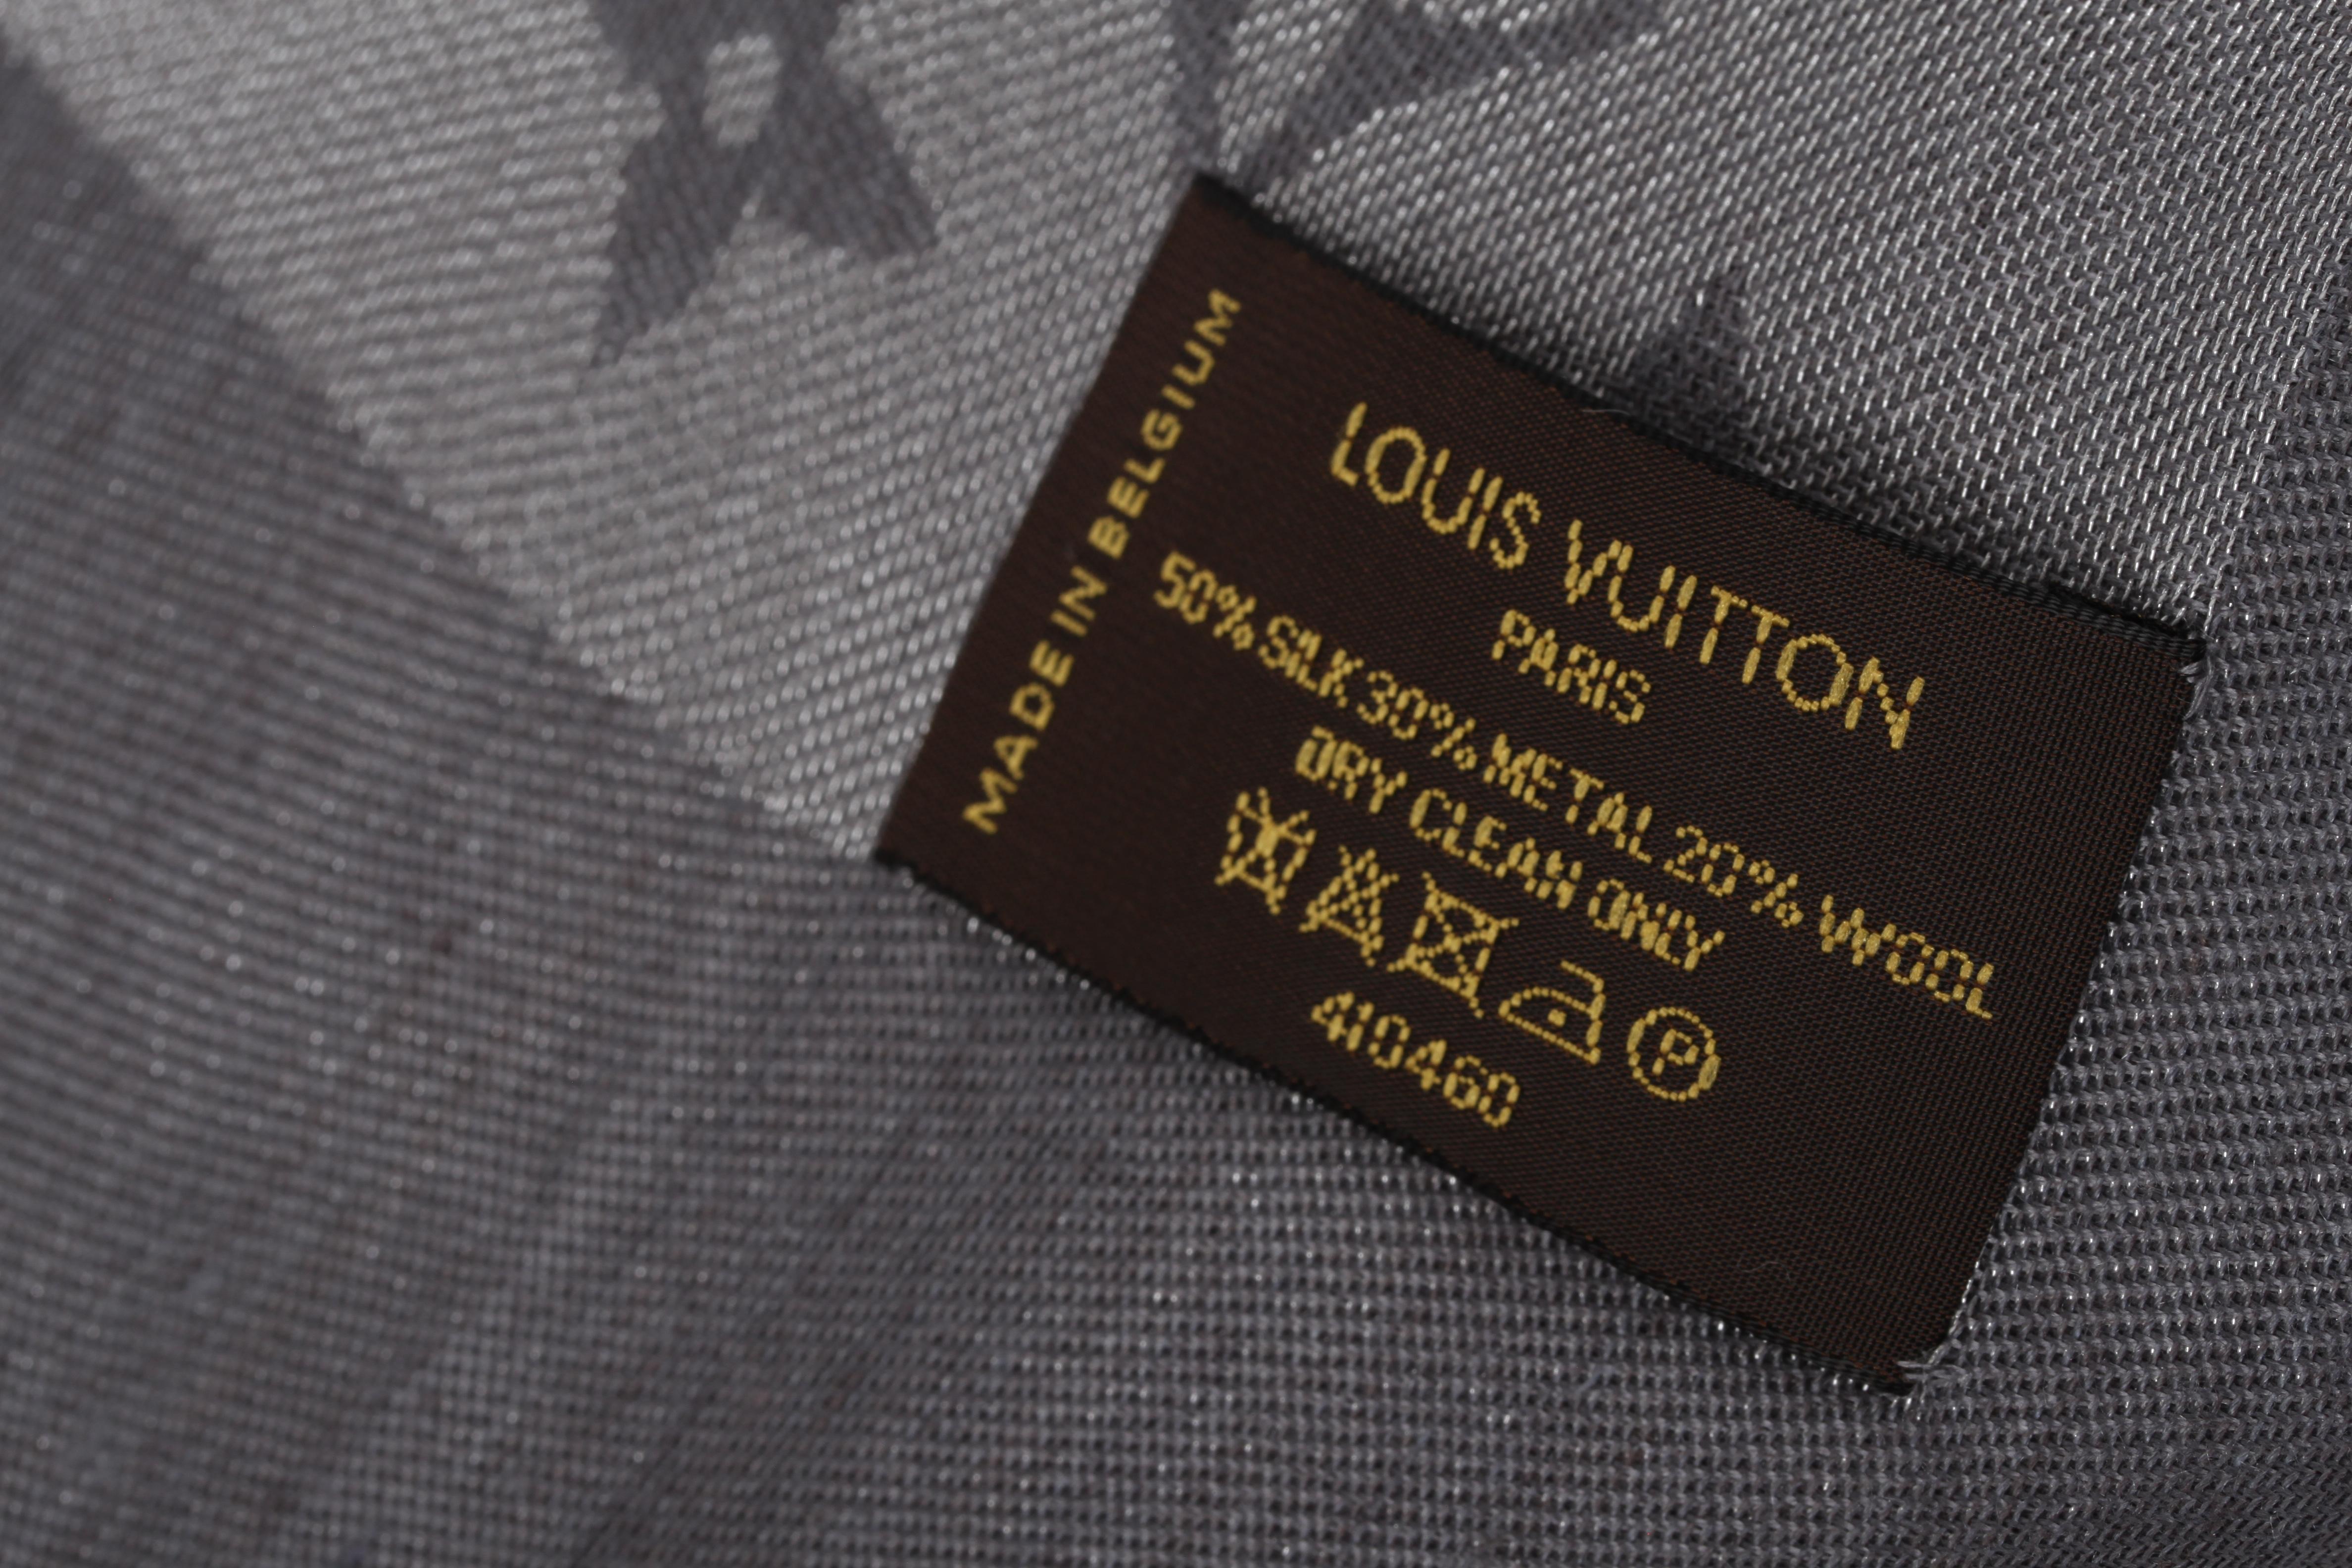 Rather large scarf by Louis Vuitton in black and silver.

This shawl measures as much as 140 x 140 centimeter and is covered with Louis Vuitton Monograms. Very sophisticated design, the silver part has a subtle shine. Fringe trimming.

Maybe worn